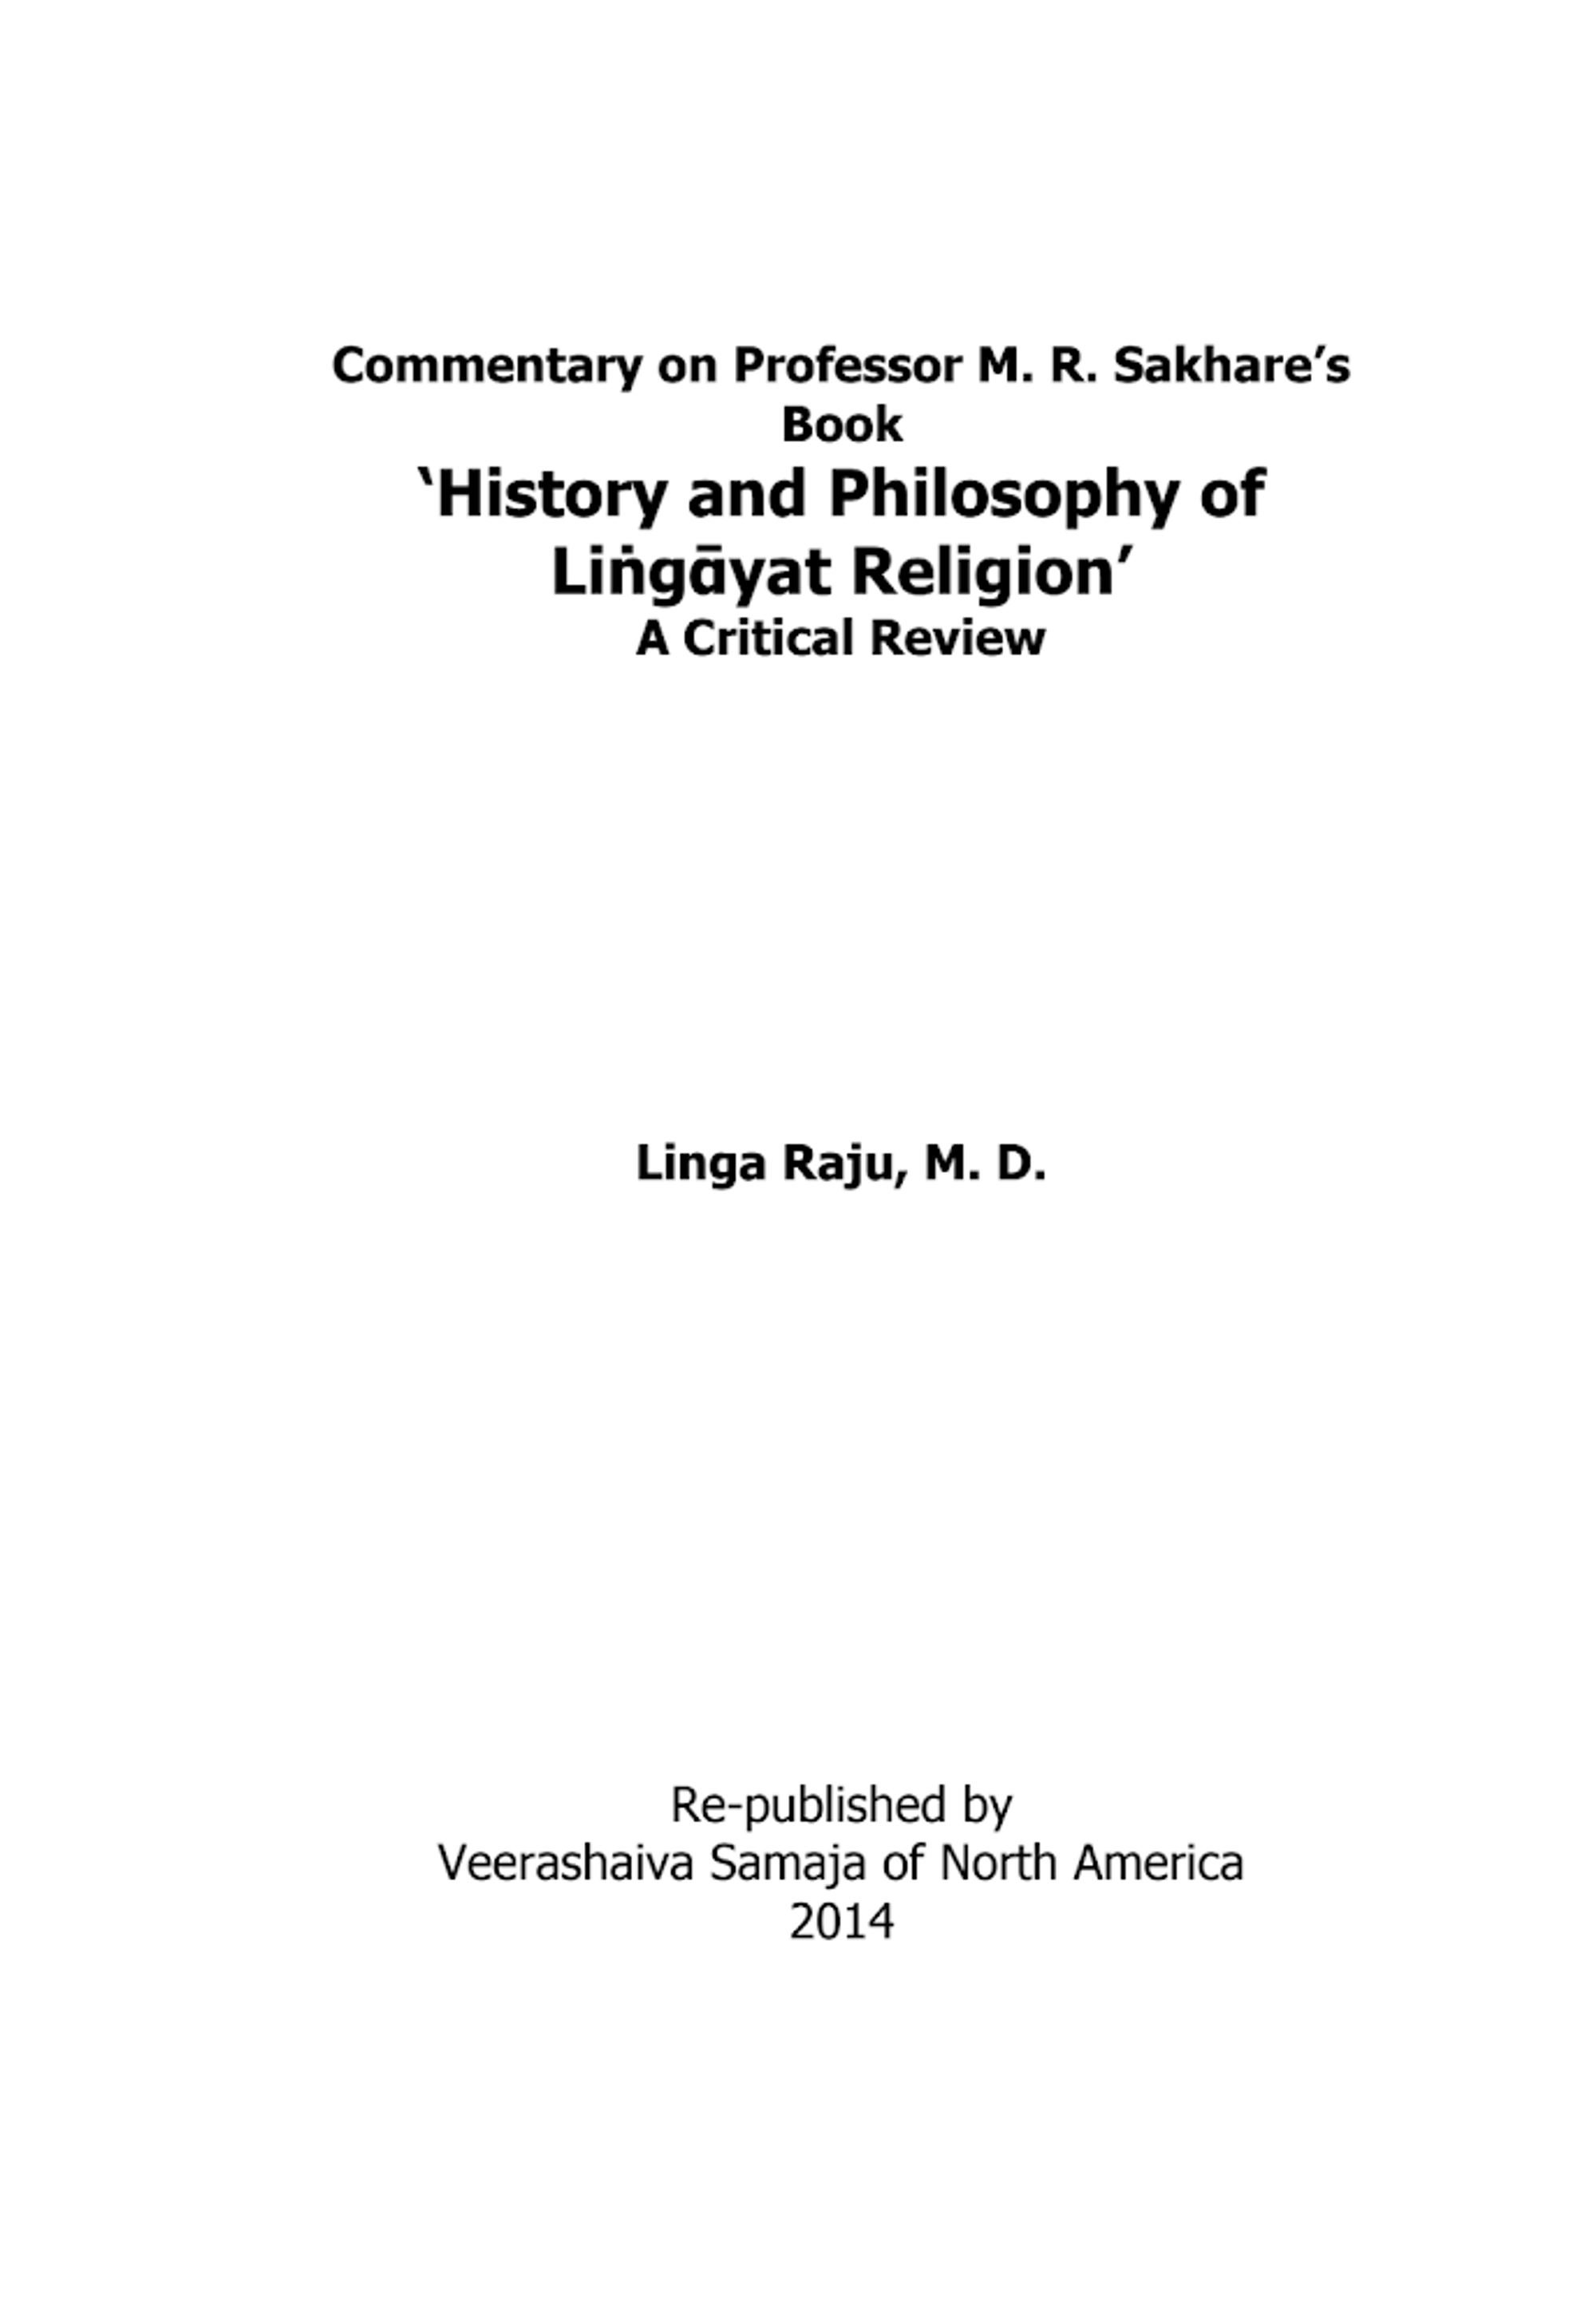 Publication_Commentary_on_Professor_M._R._Sakhares_Book_History_and_Philosophy_of_Liṅgᾱyat_Relig.pdf